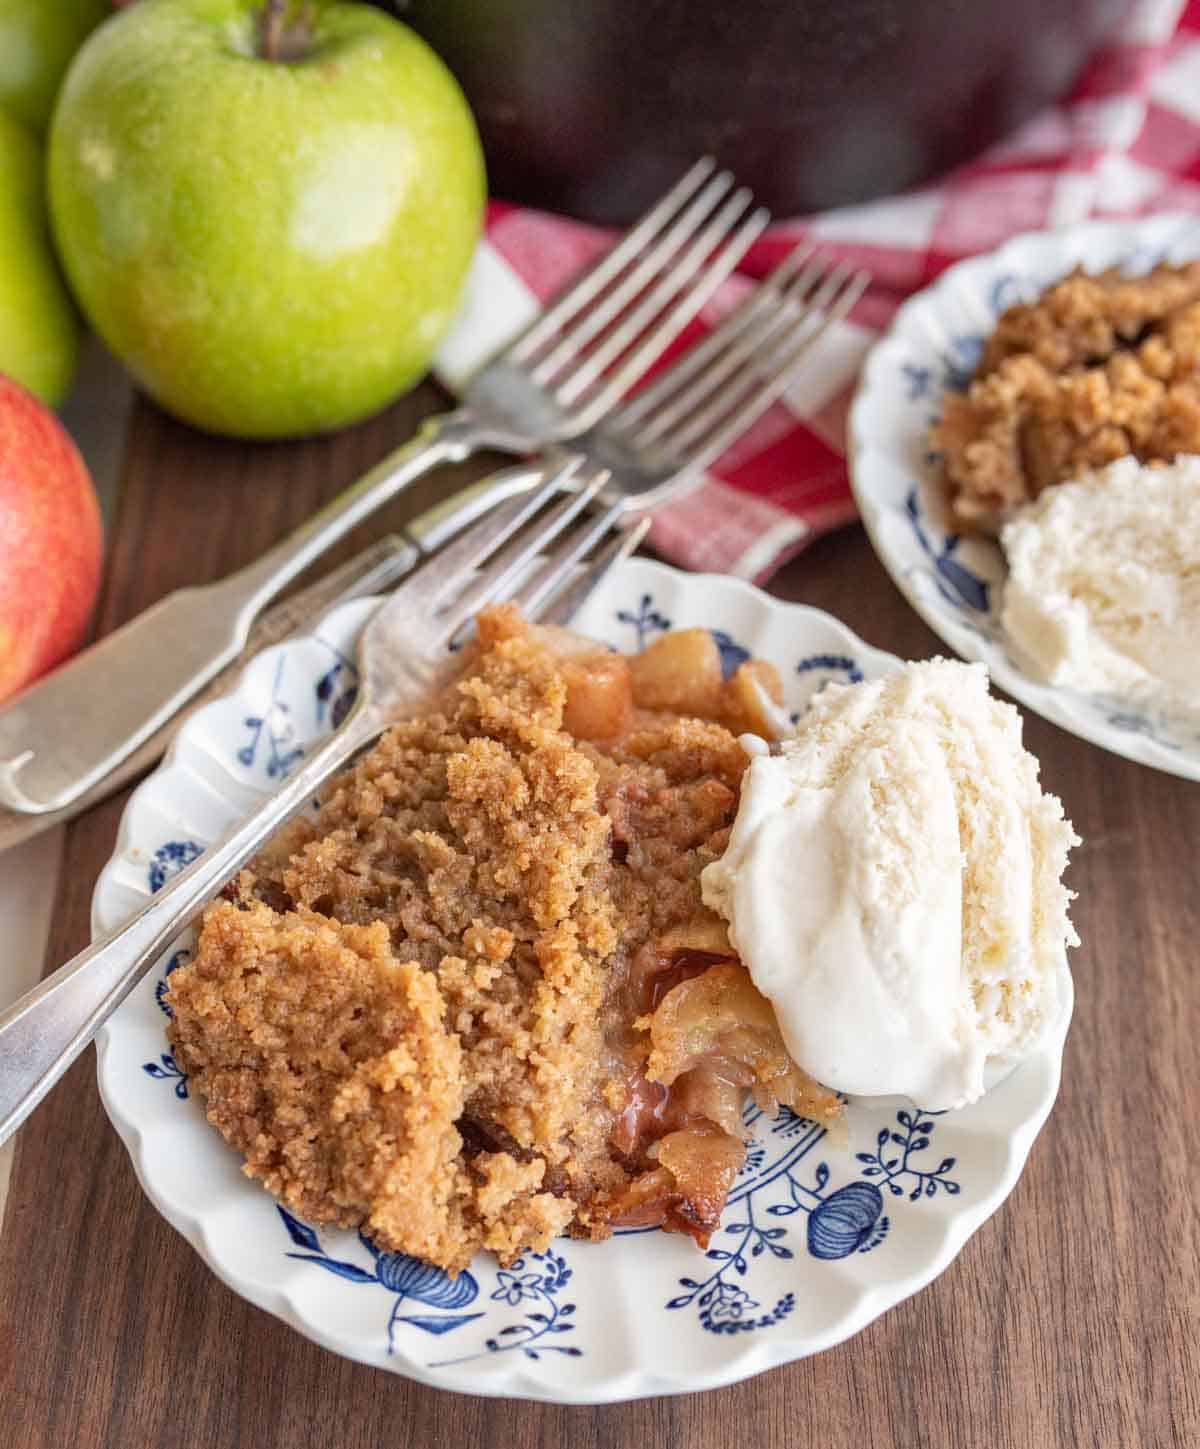 apple crumble served on a plate with ice cream